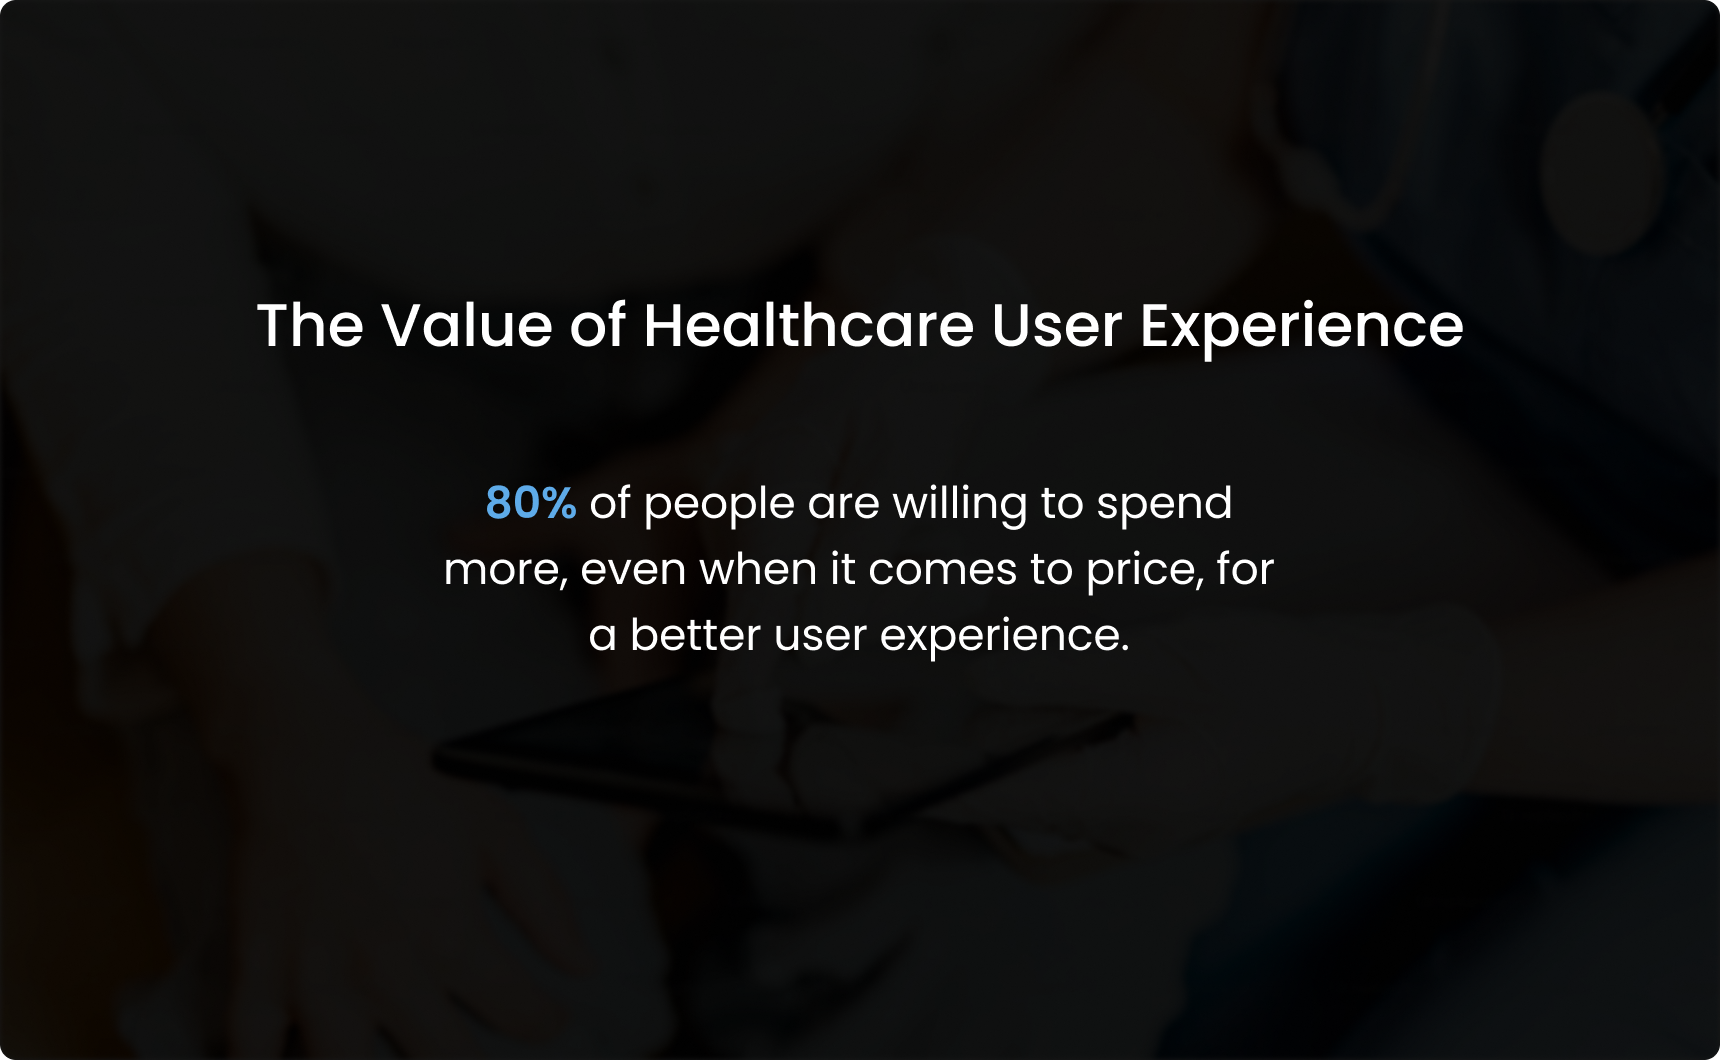 The Value of Healthcare User Experience